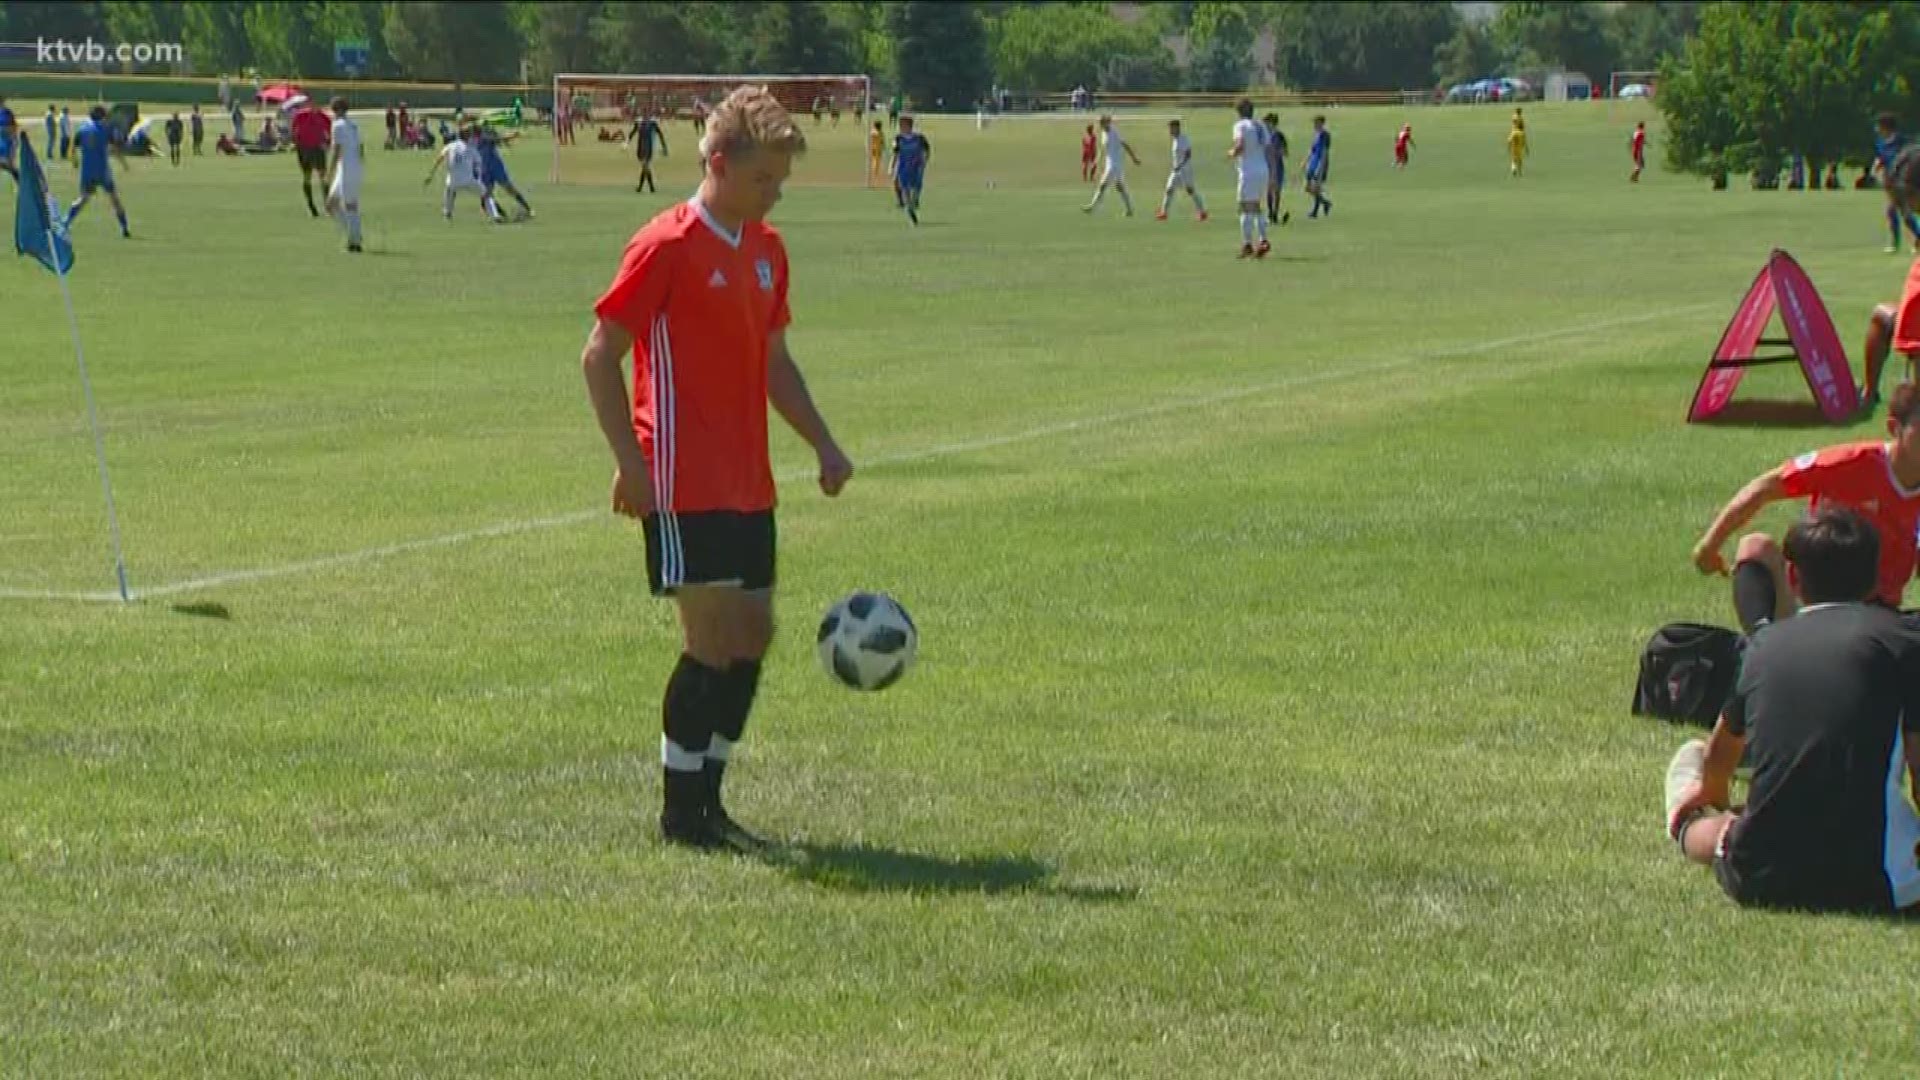 Thousands of people are in town for a regional soccer tournament.